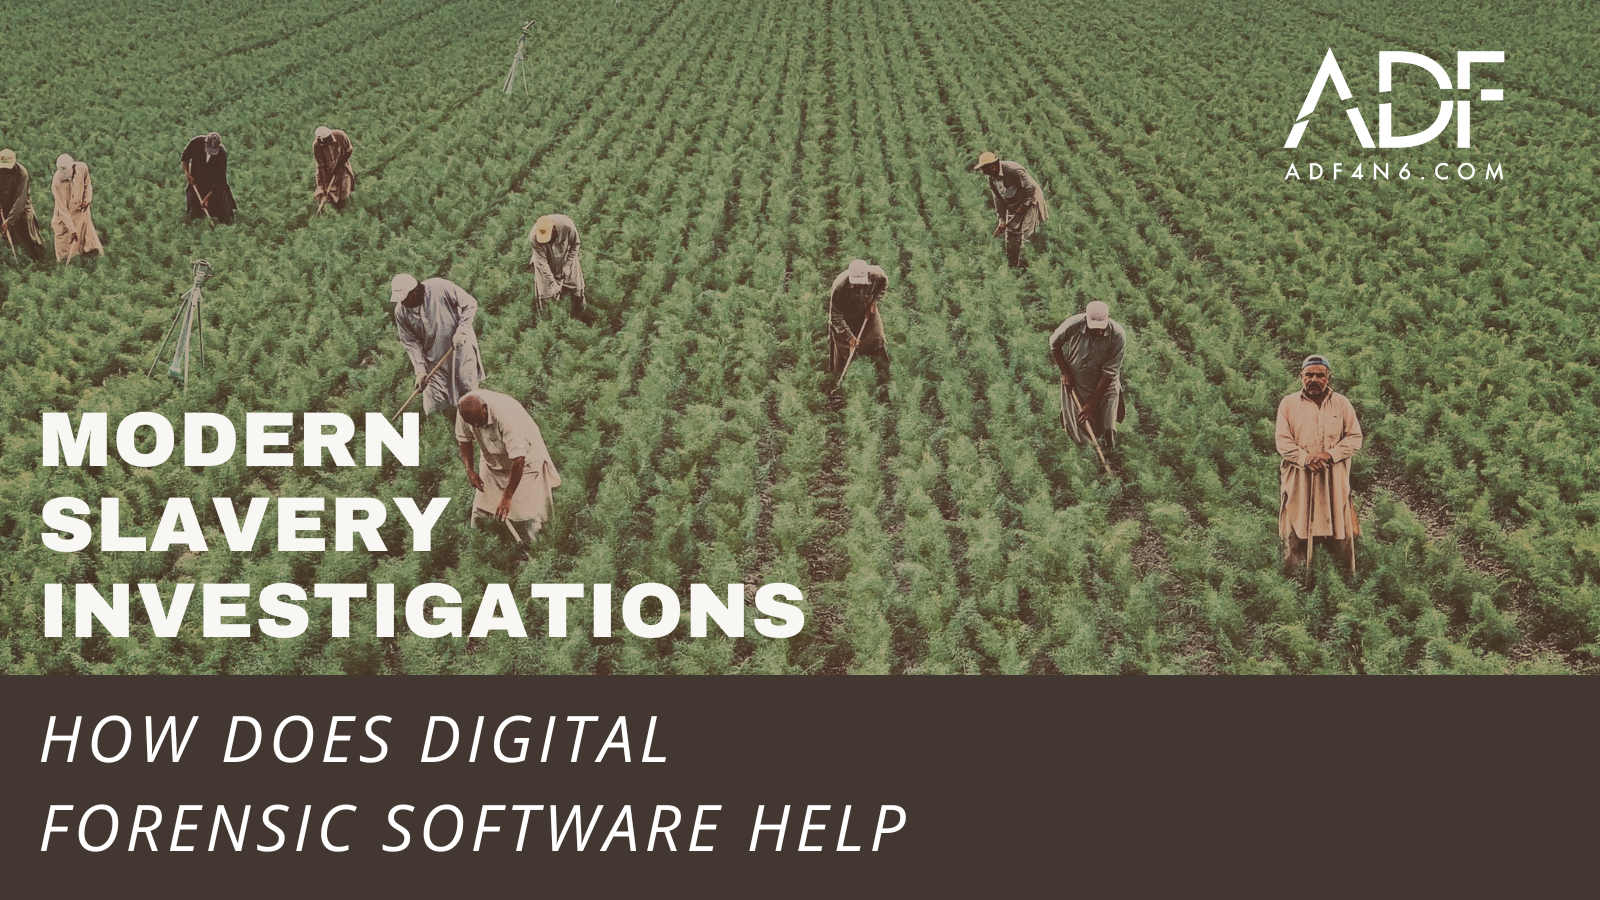 How does digital forensic software help modern slavery investigations?